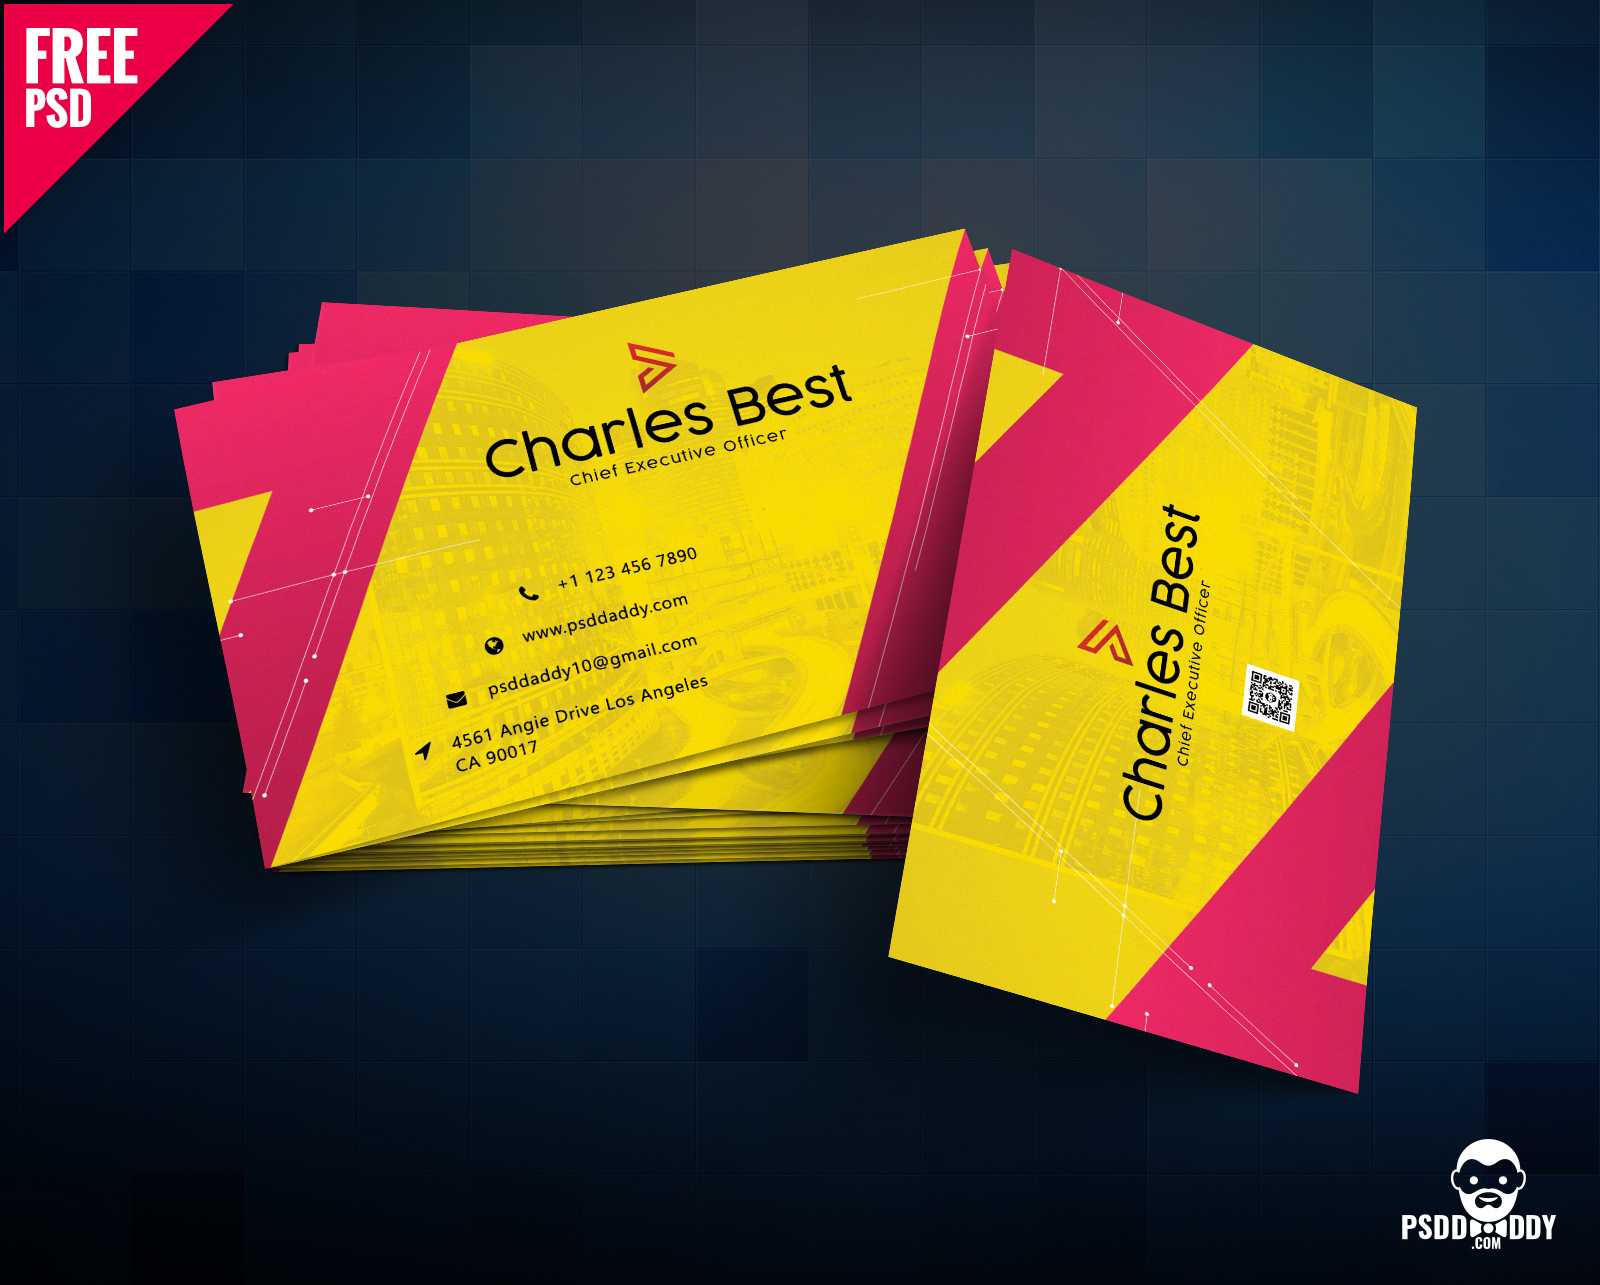 Download] Creative Business Card Free Psd | Psddaddy Inside Psd Name Card Template